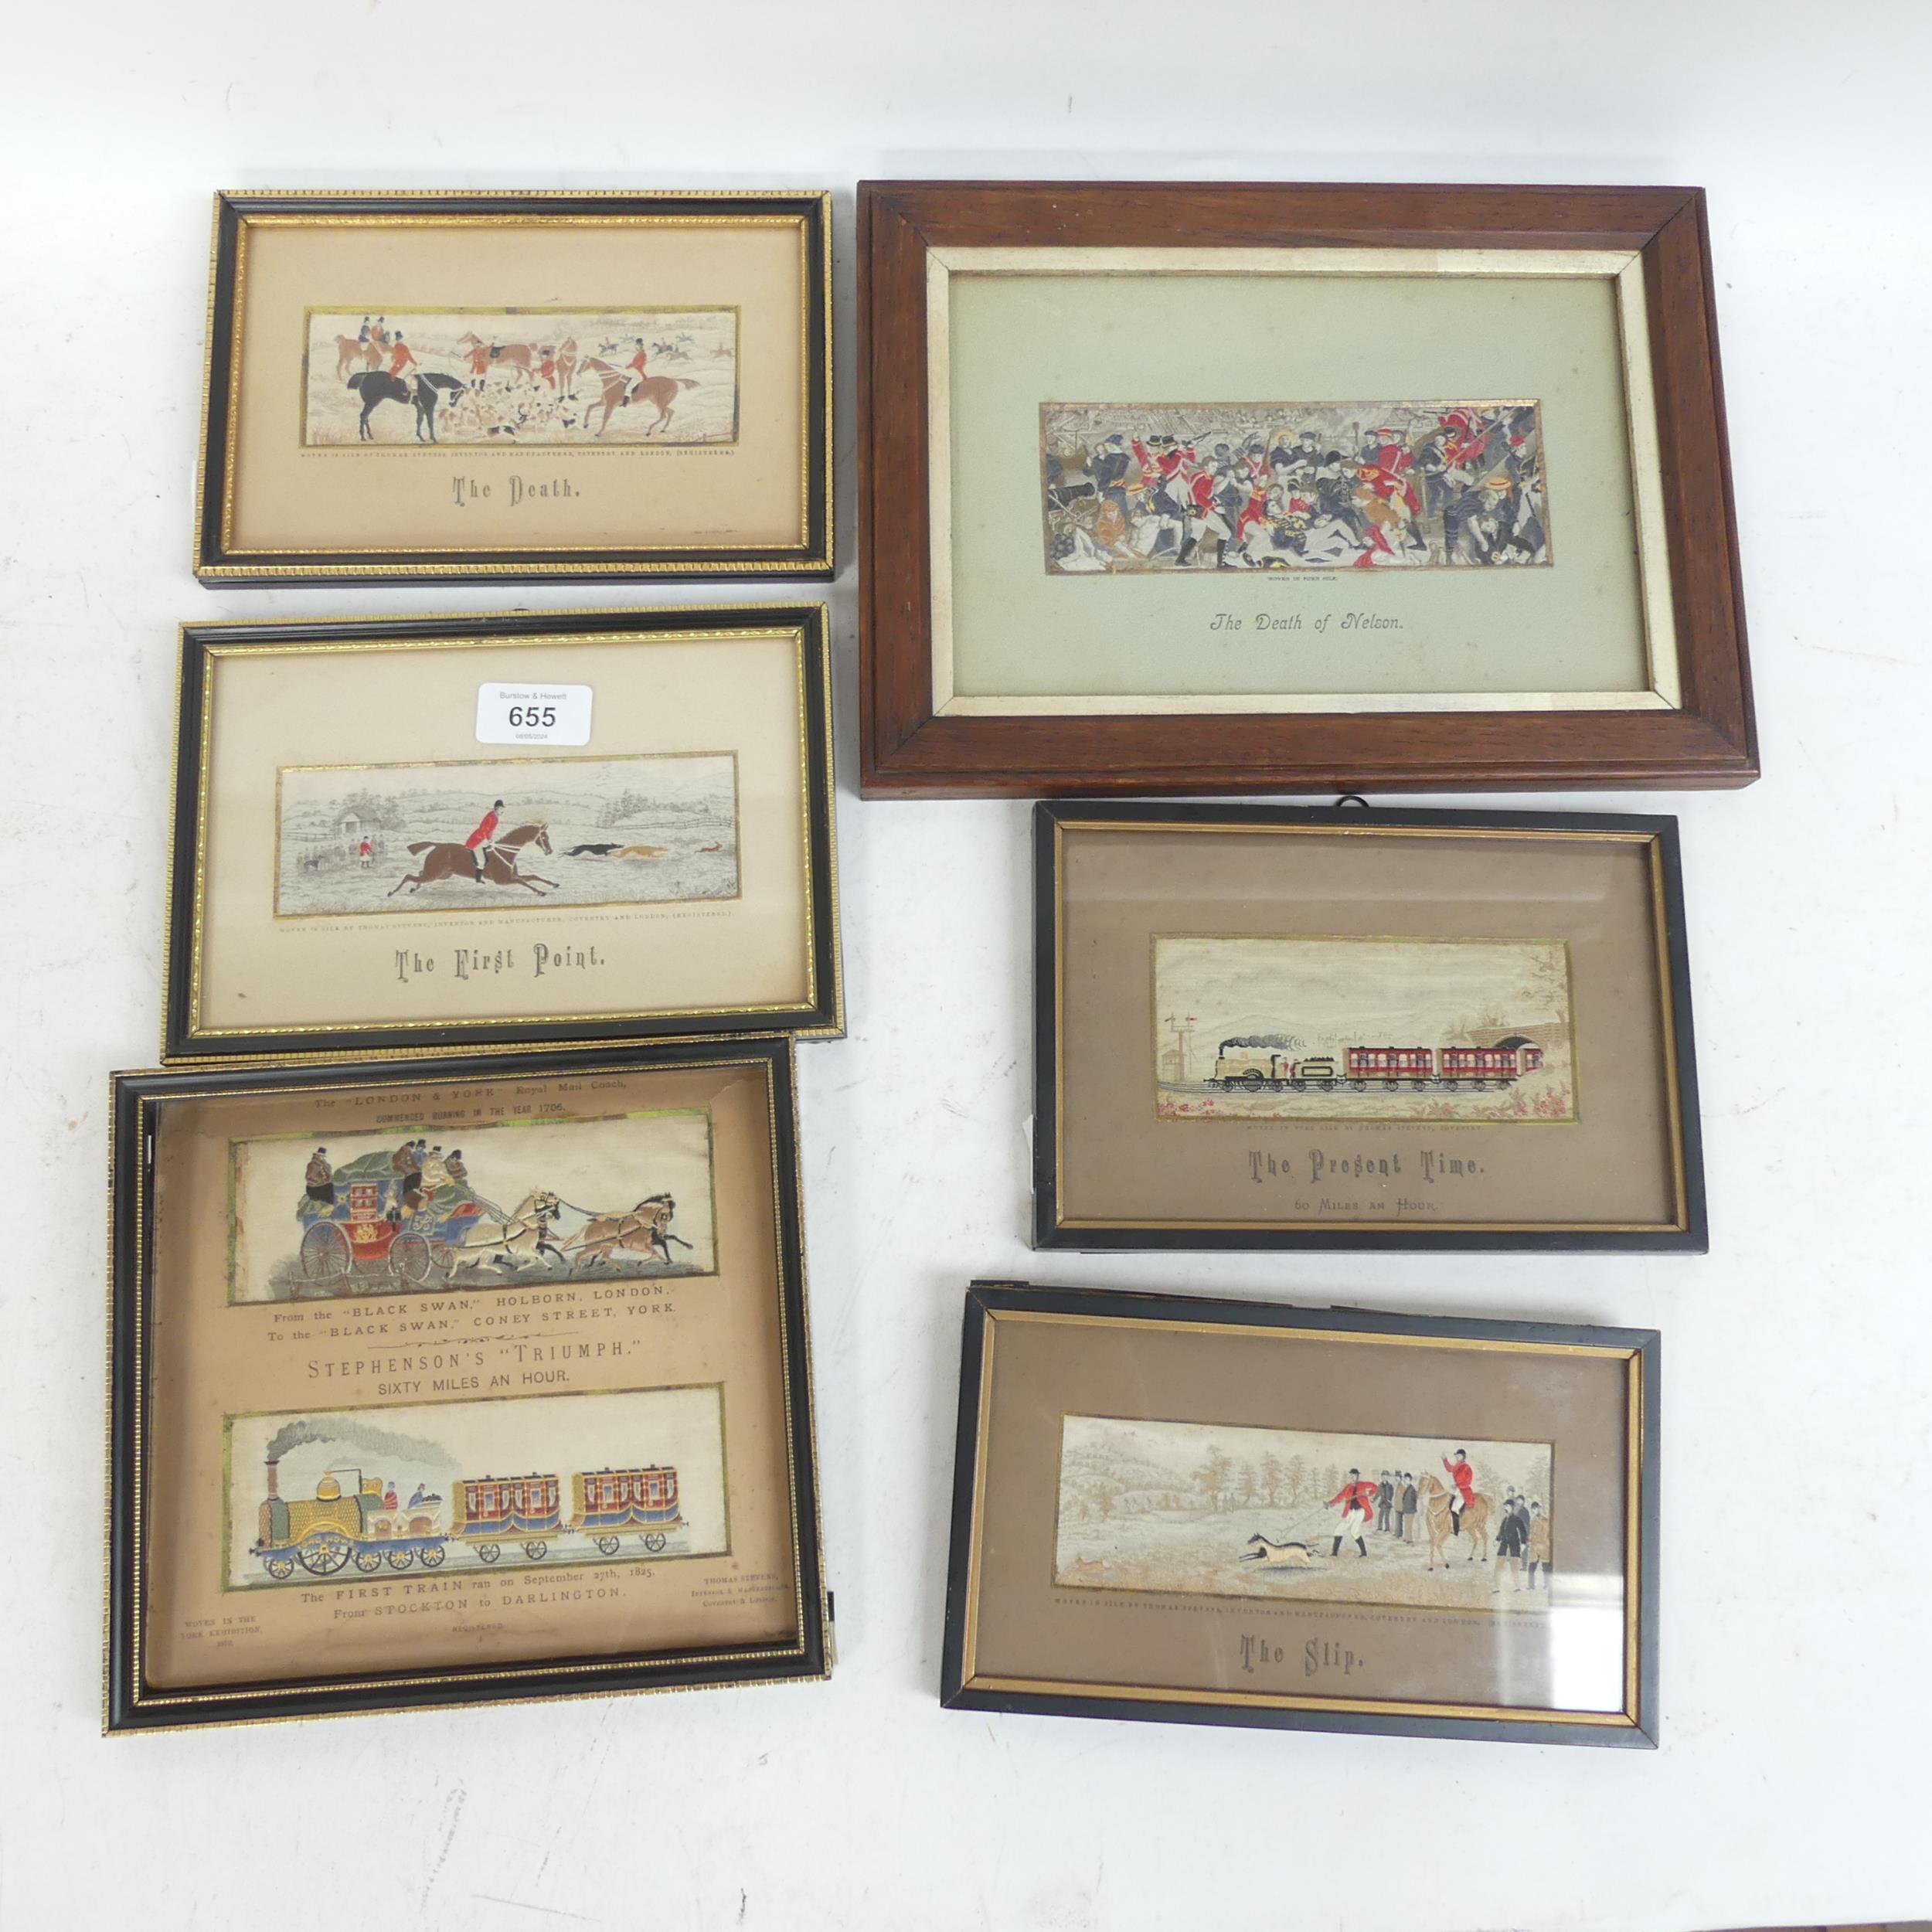 3 Stevengraphs depicting hunting scenes, and 2 depicting Stephenson's "Triumph", and another